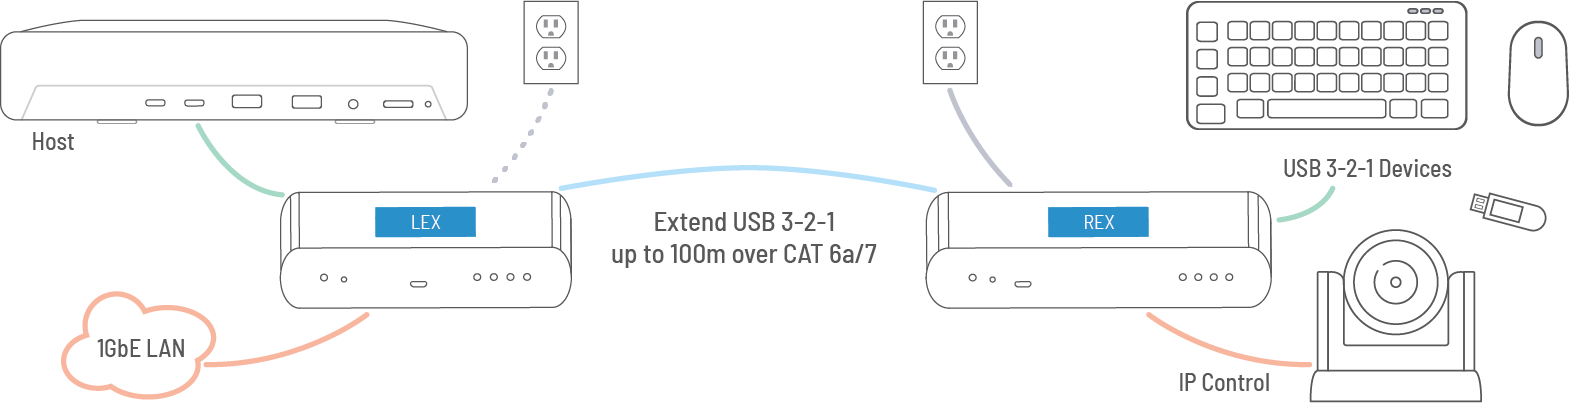 Icron USB 3-2-1 Raven 3204C 100m CAT 6a/7 Point-to-Point Extender System Application Diagram